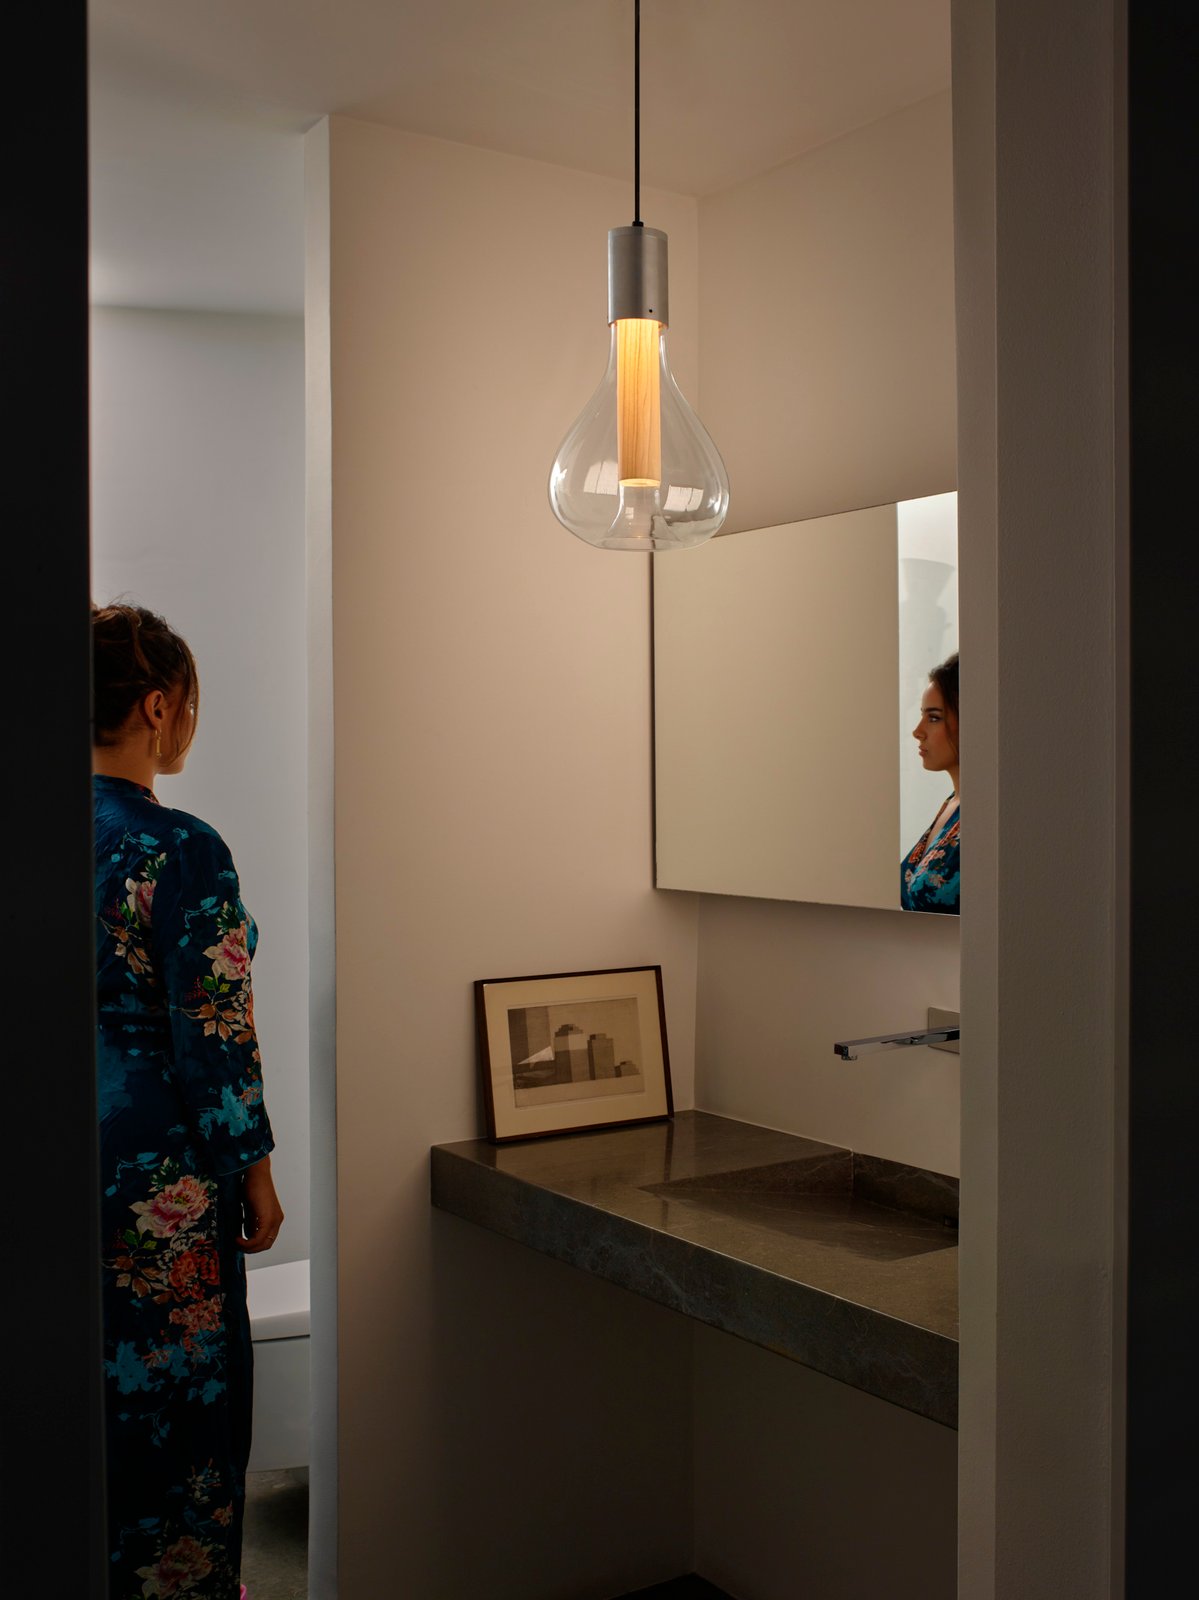 bathroom illuminated-with-the-Eris-lamp-by-lzf-lamps-that-provides-a-soft-and-pleasant-atmosphere-with-its-glass-paired-with-wood